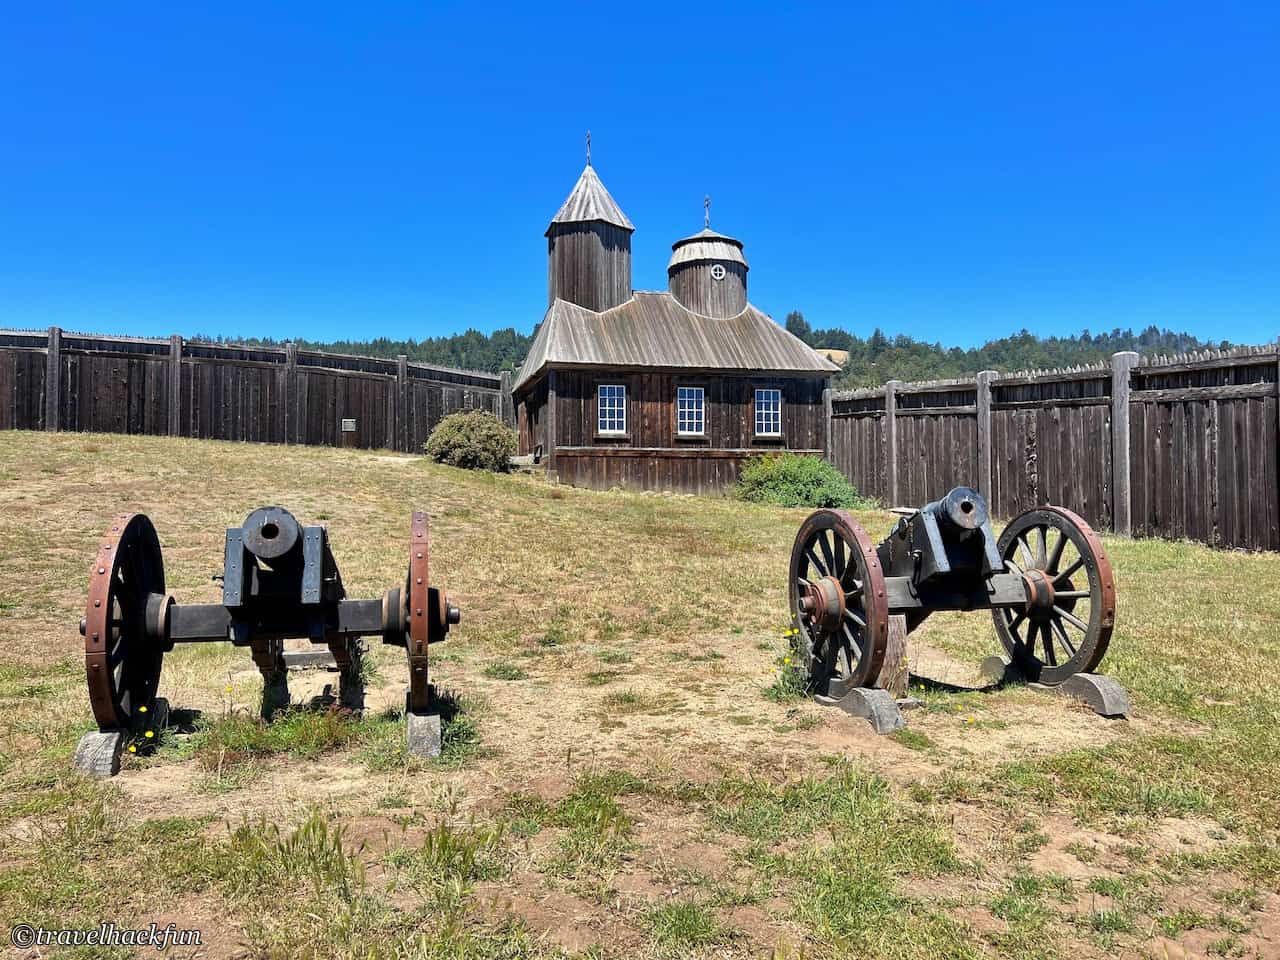 Fort Ross,俄羅斯堡,fort ross state park,fort ross state historic park,fort ross california 25